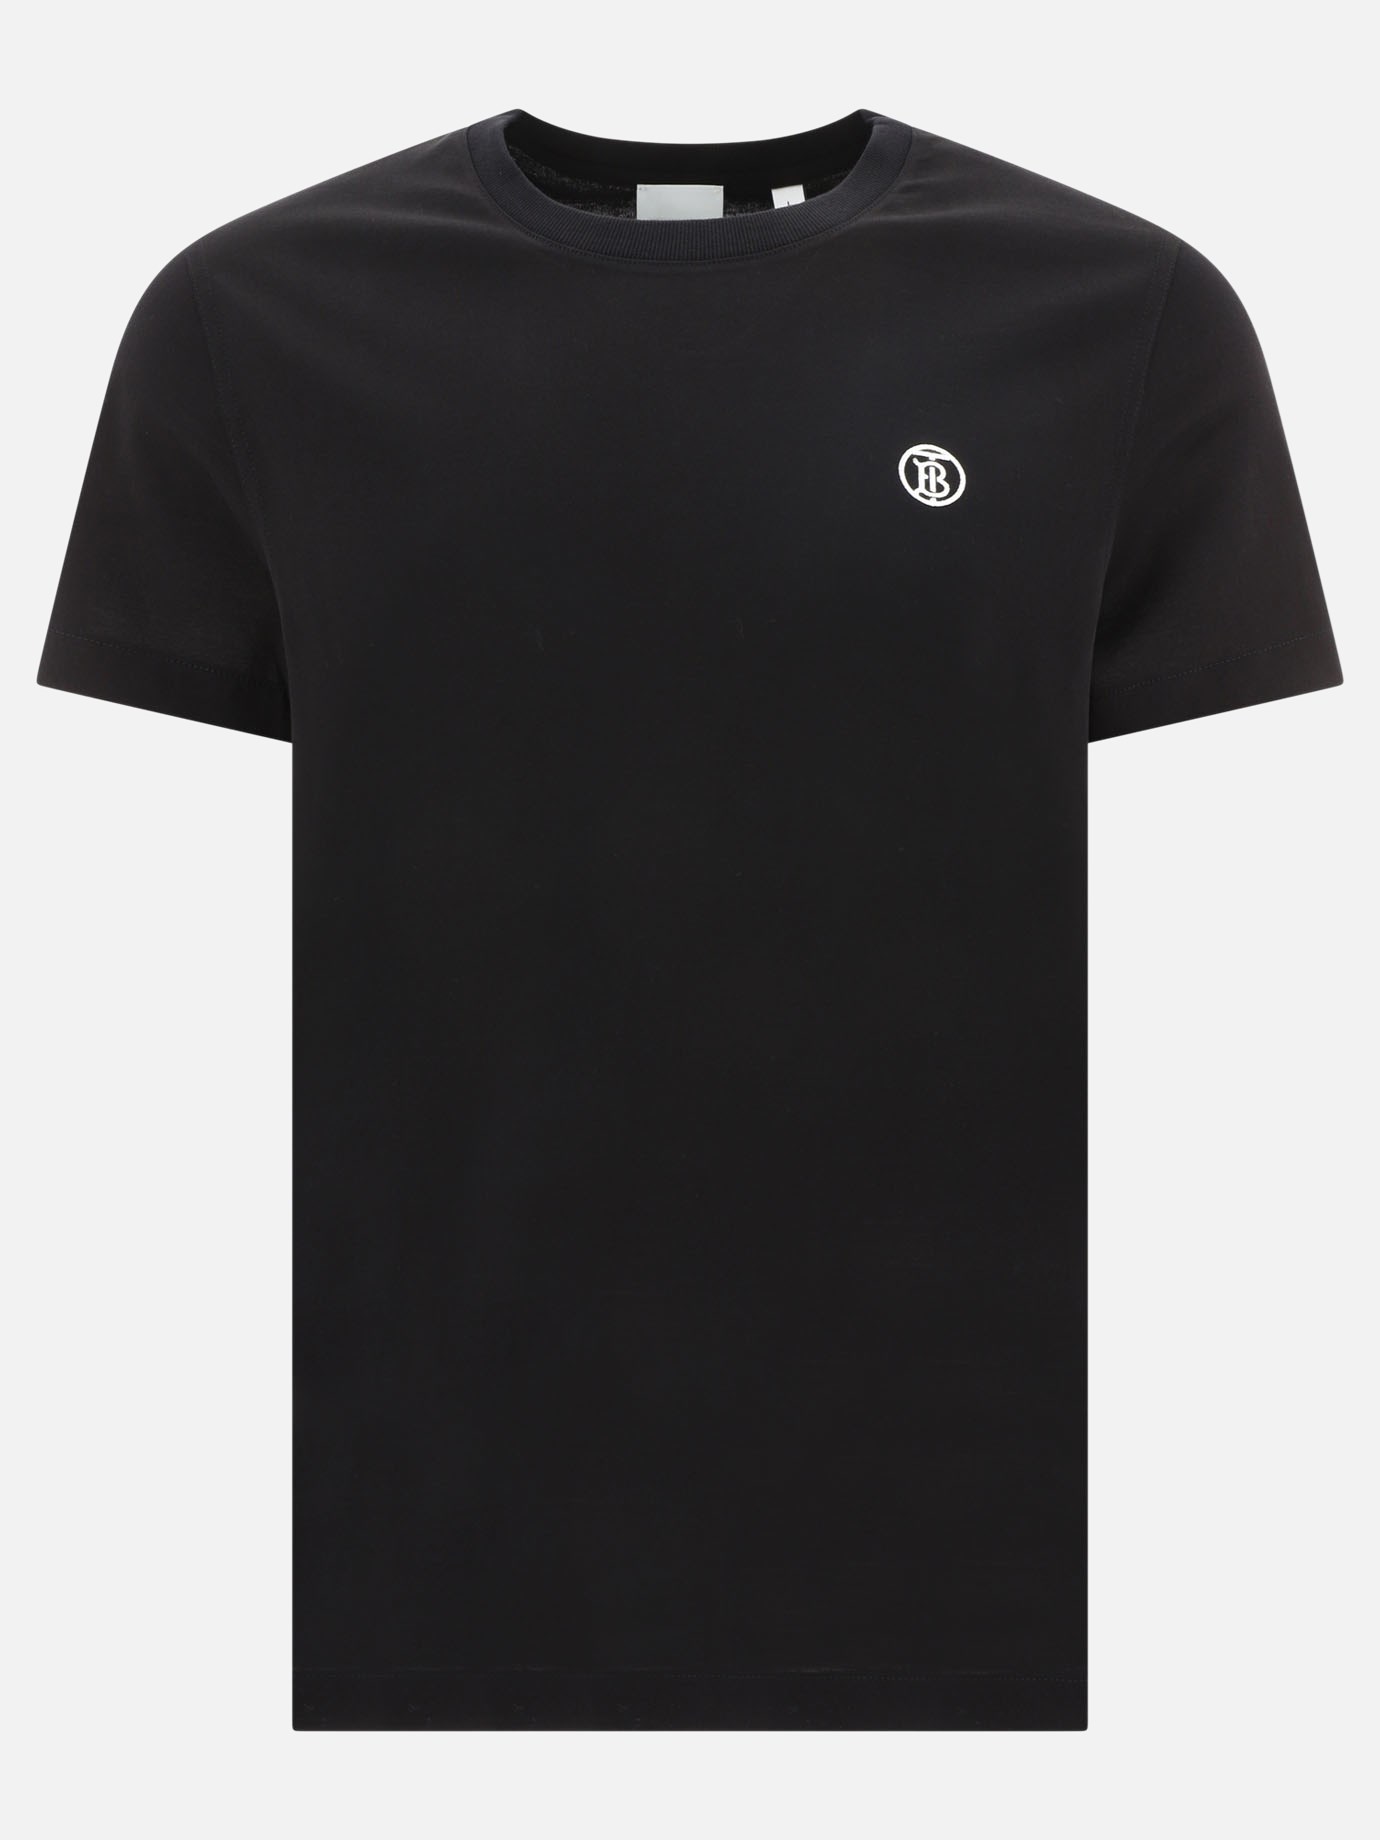 T-shirt  Parker  by Burberry